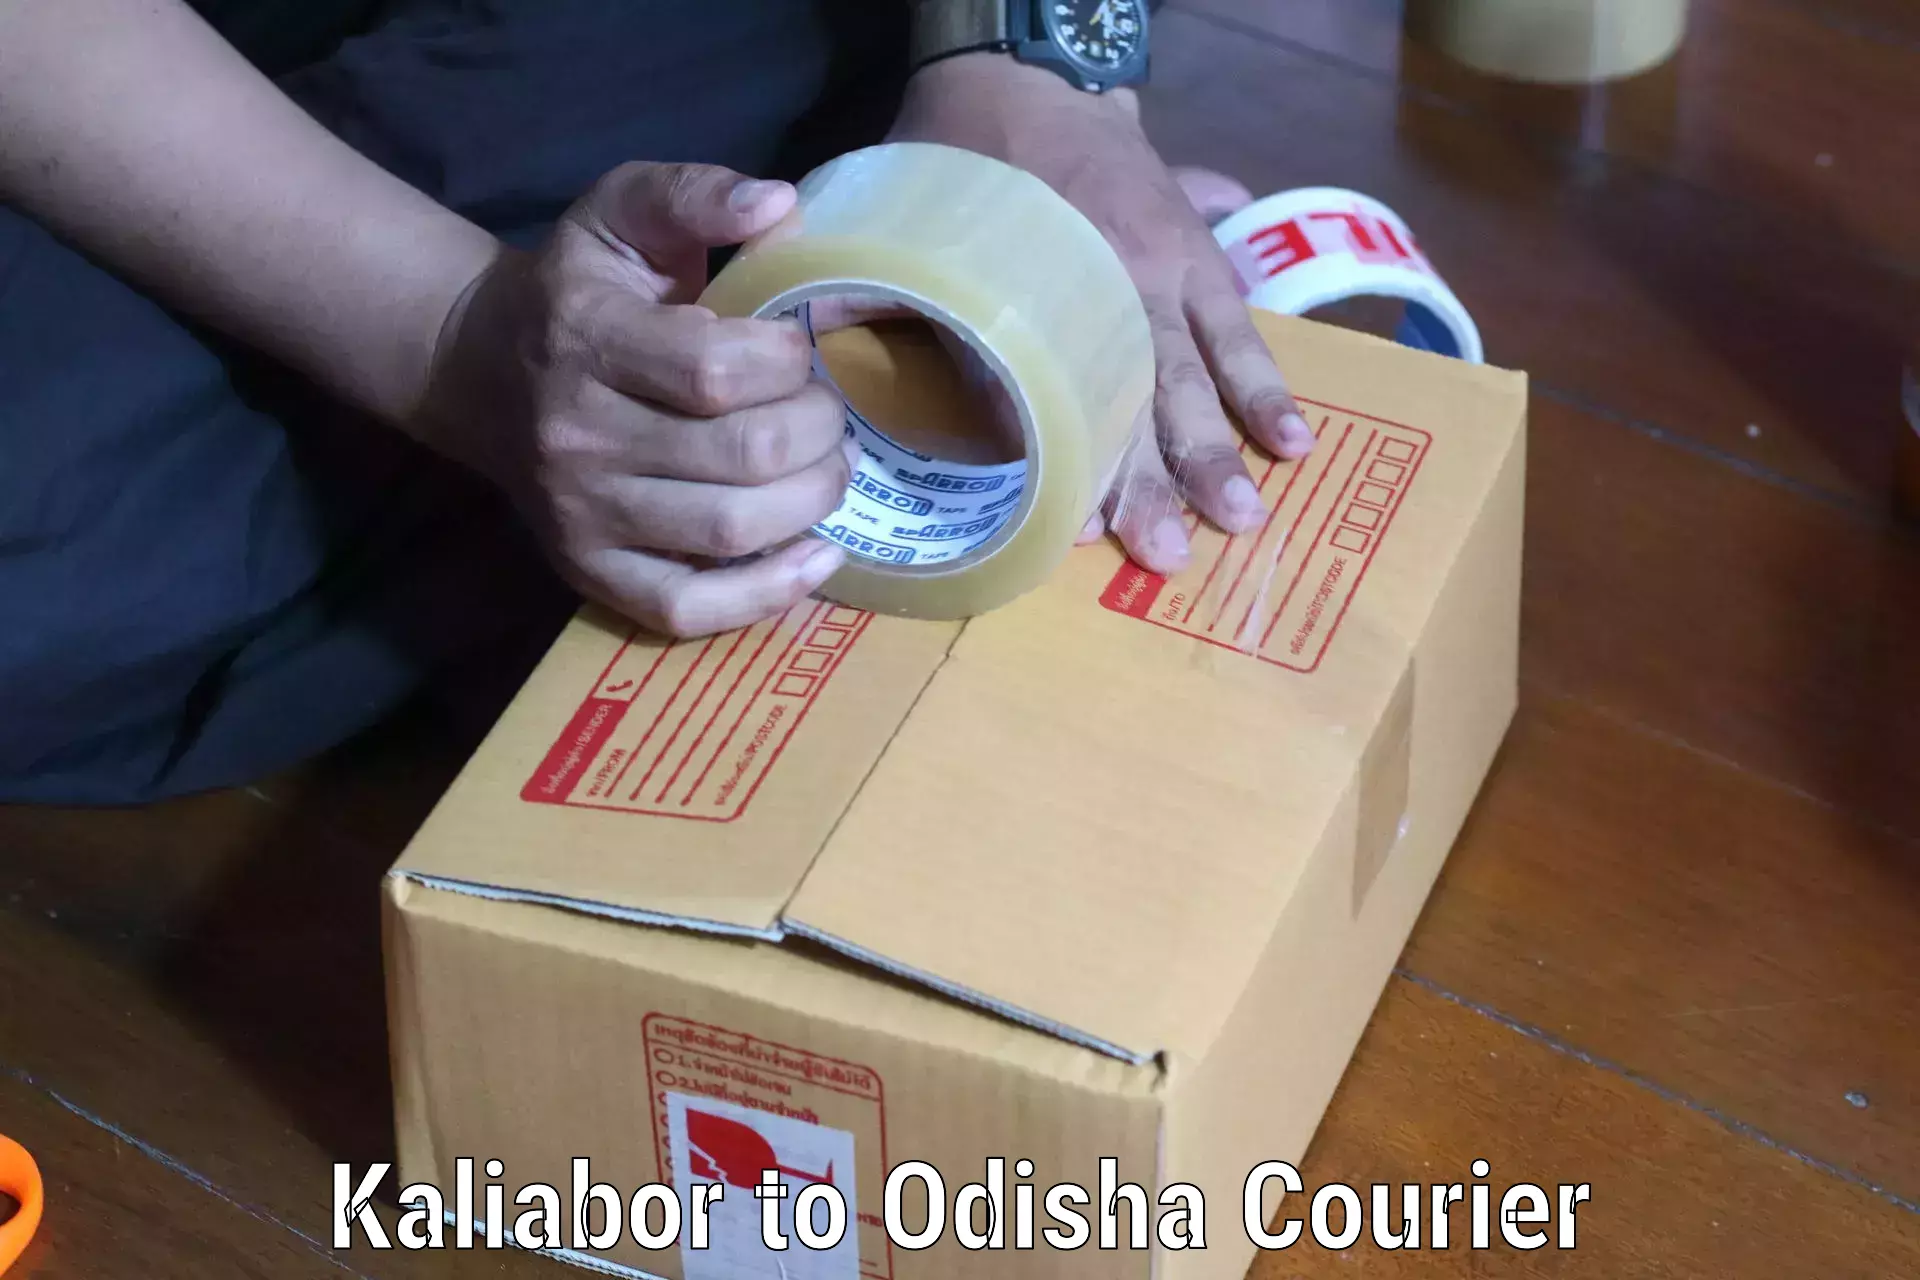 Express delivery network Kaliabor to Odisha